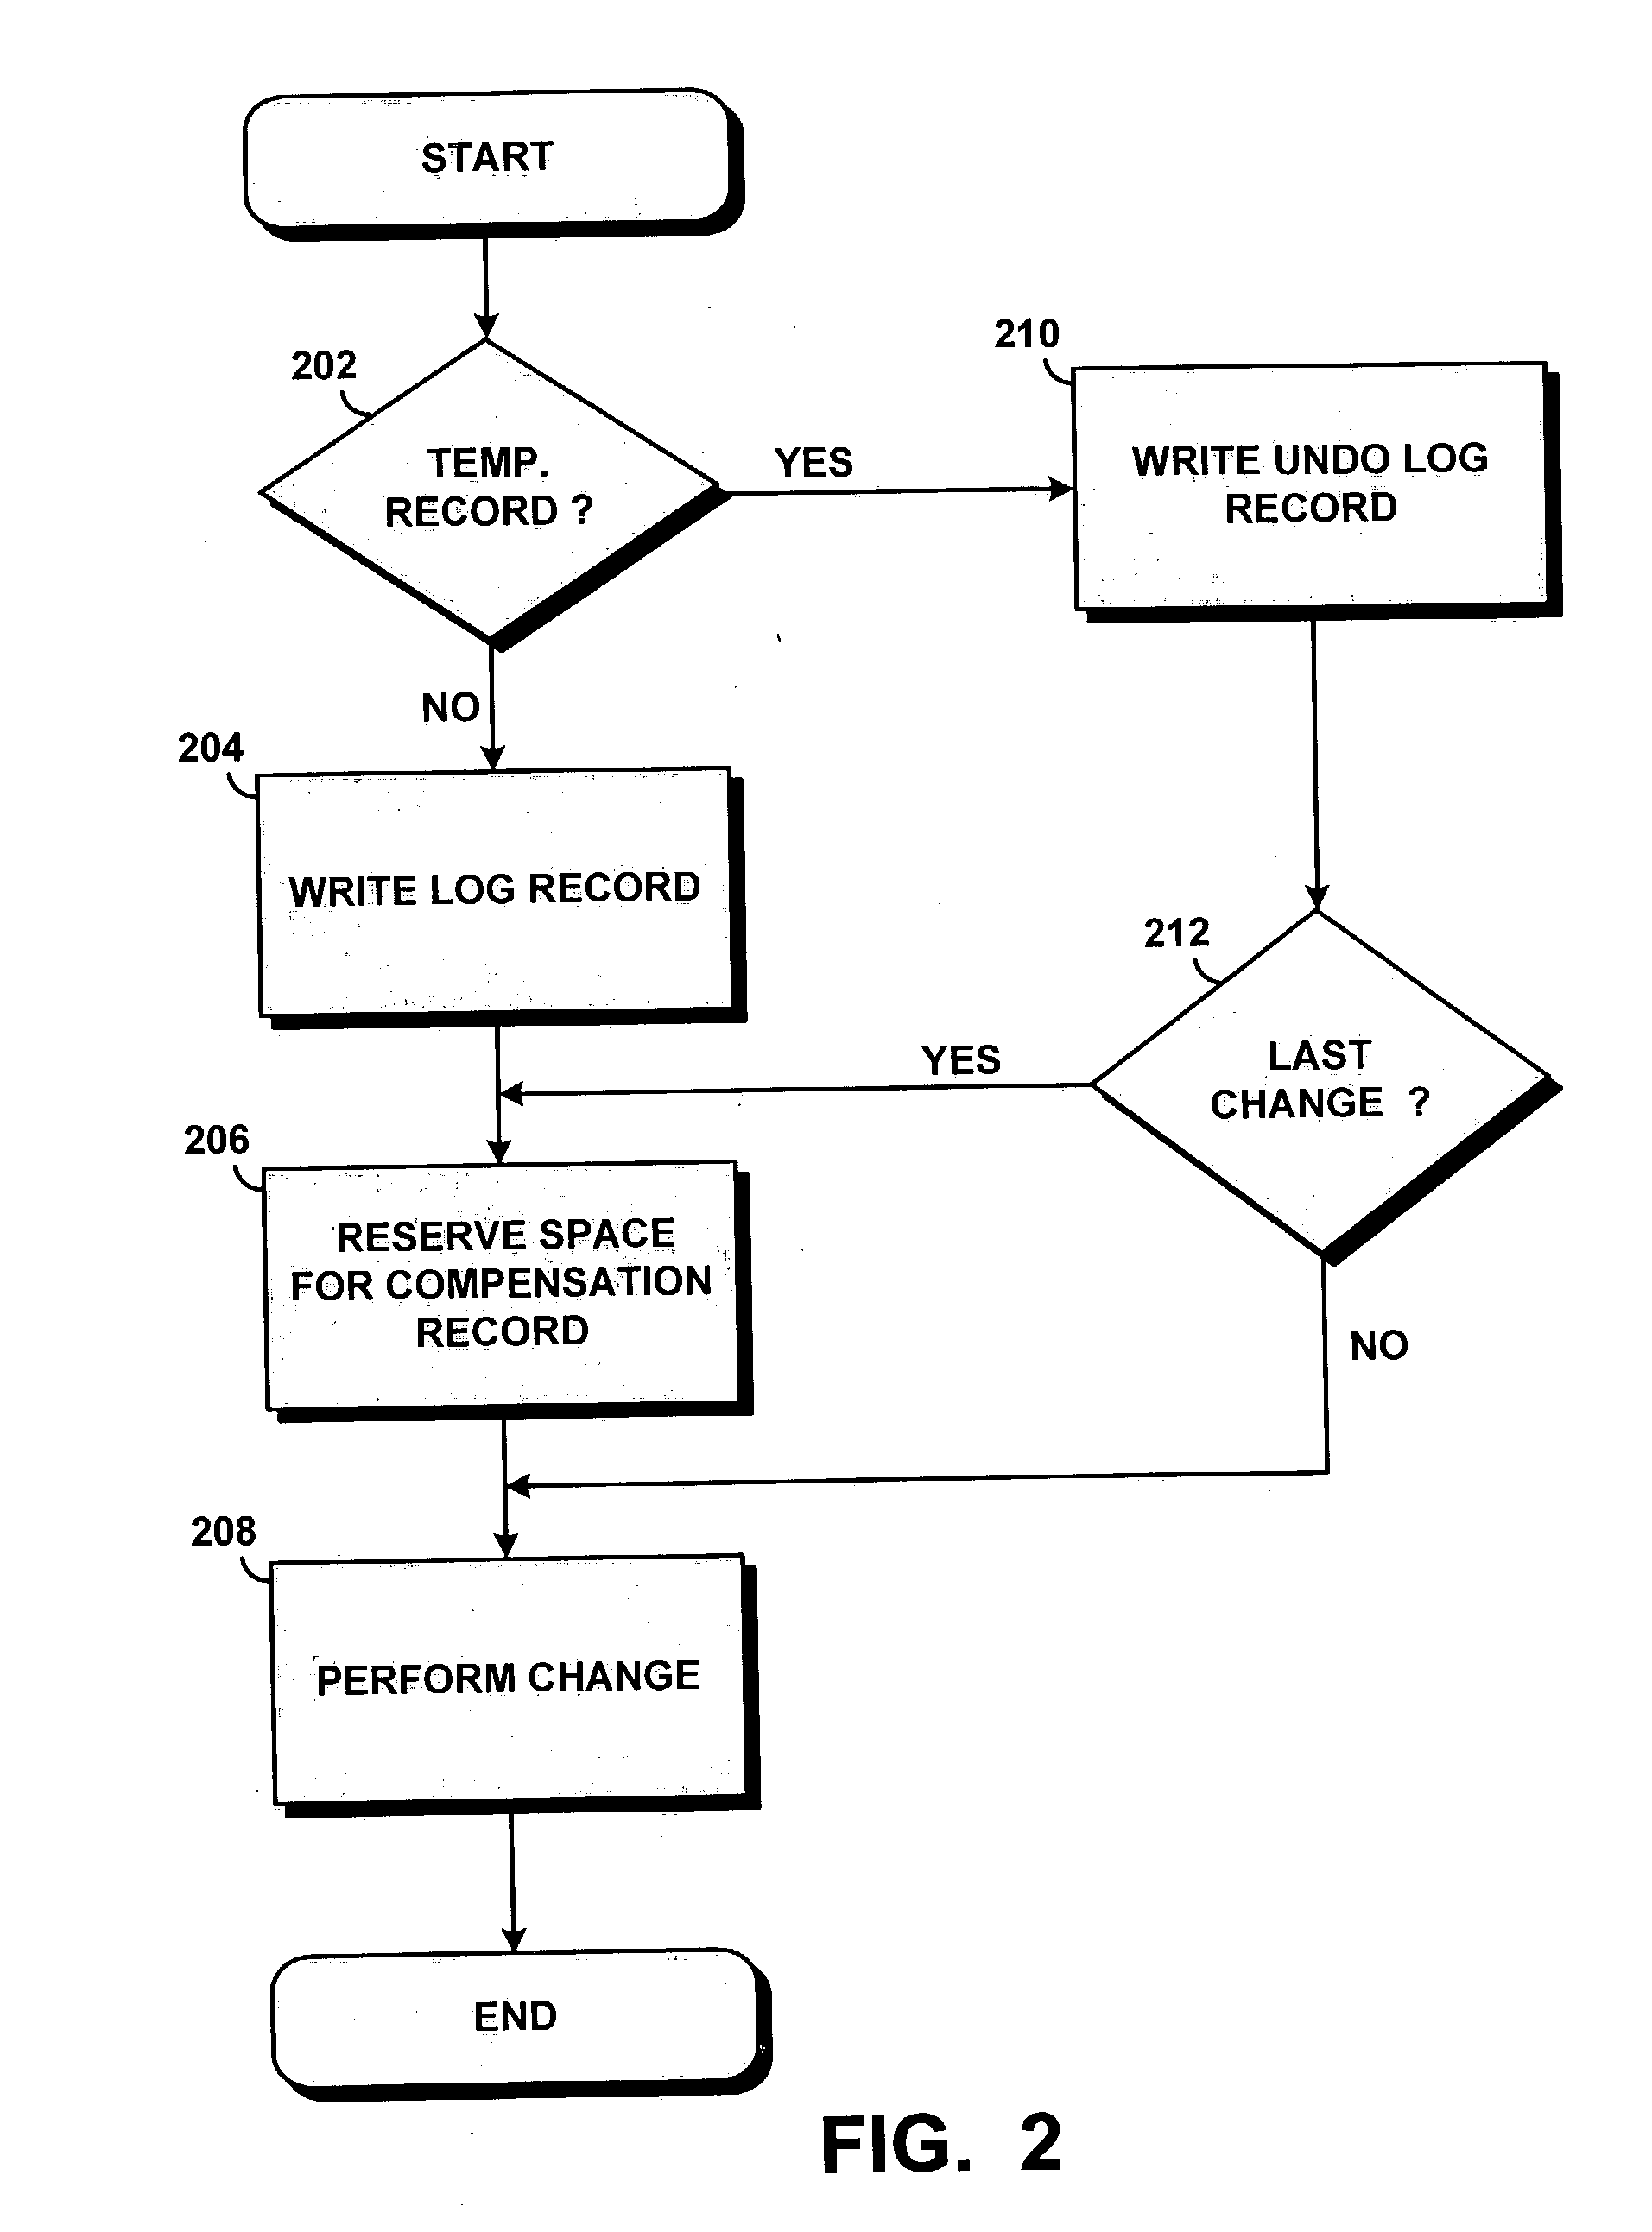 System and method for optimizing log usage for temporary objects